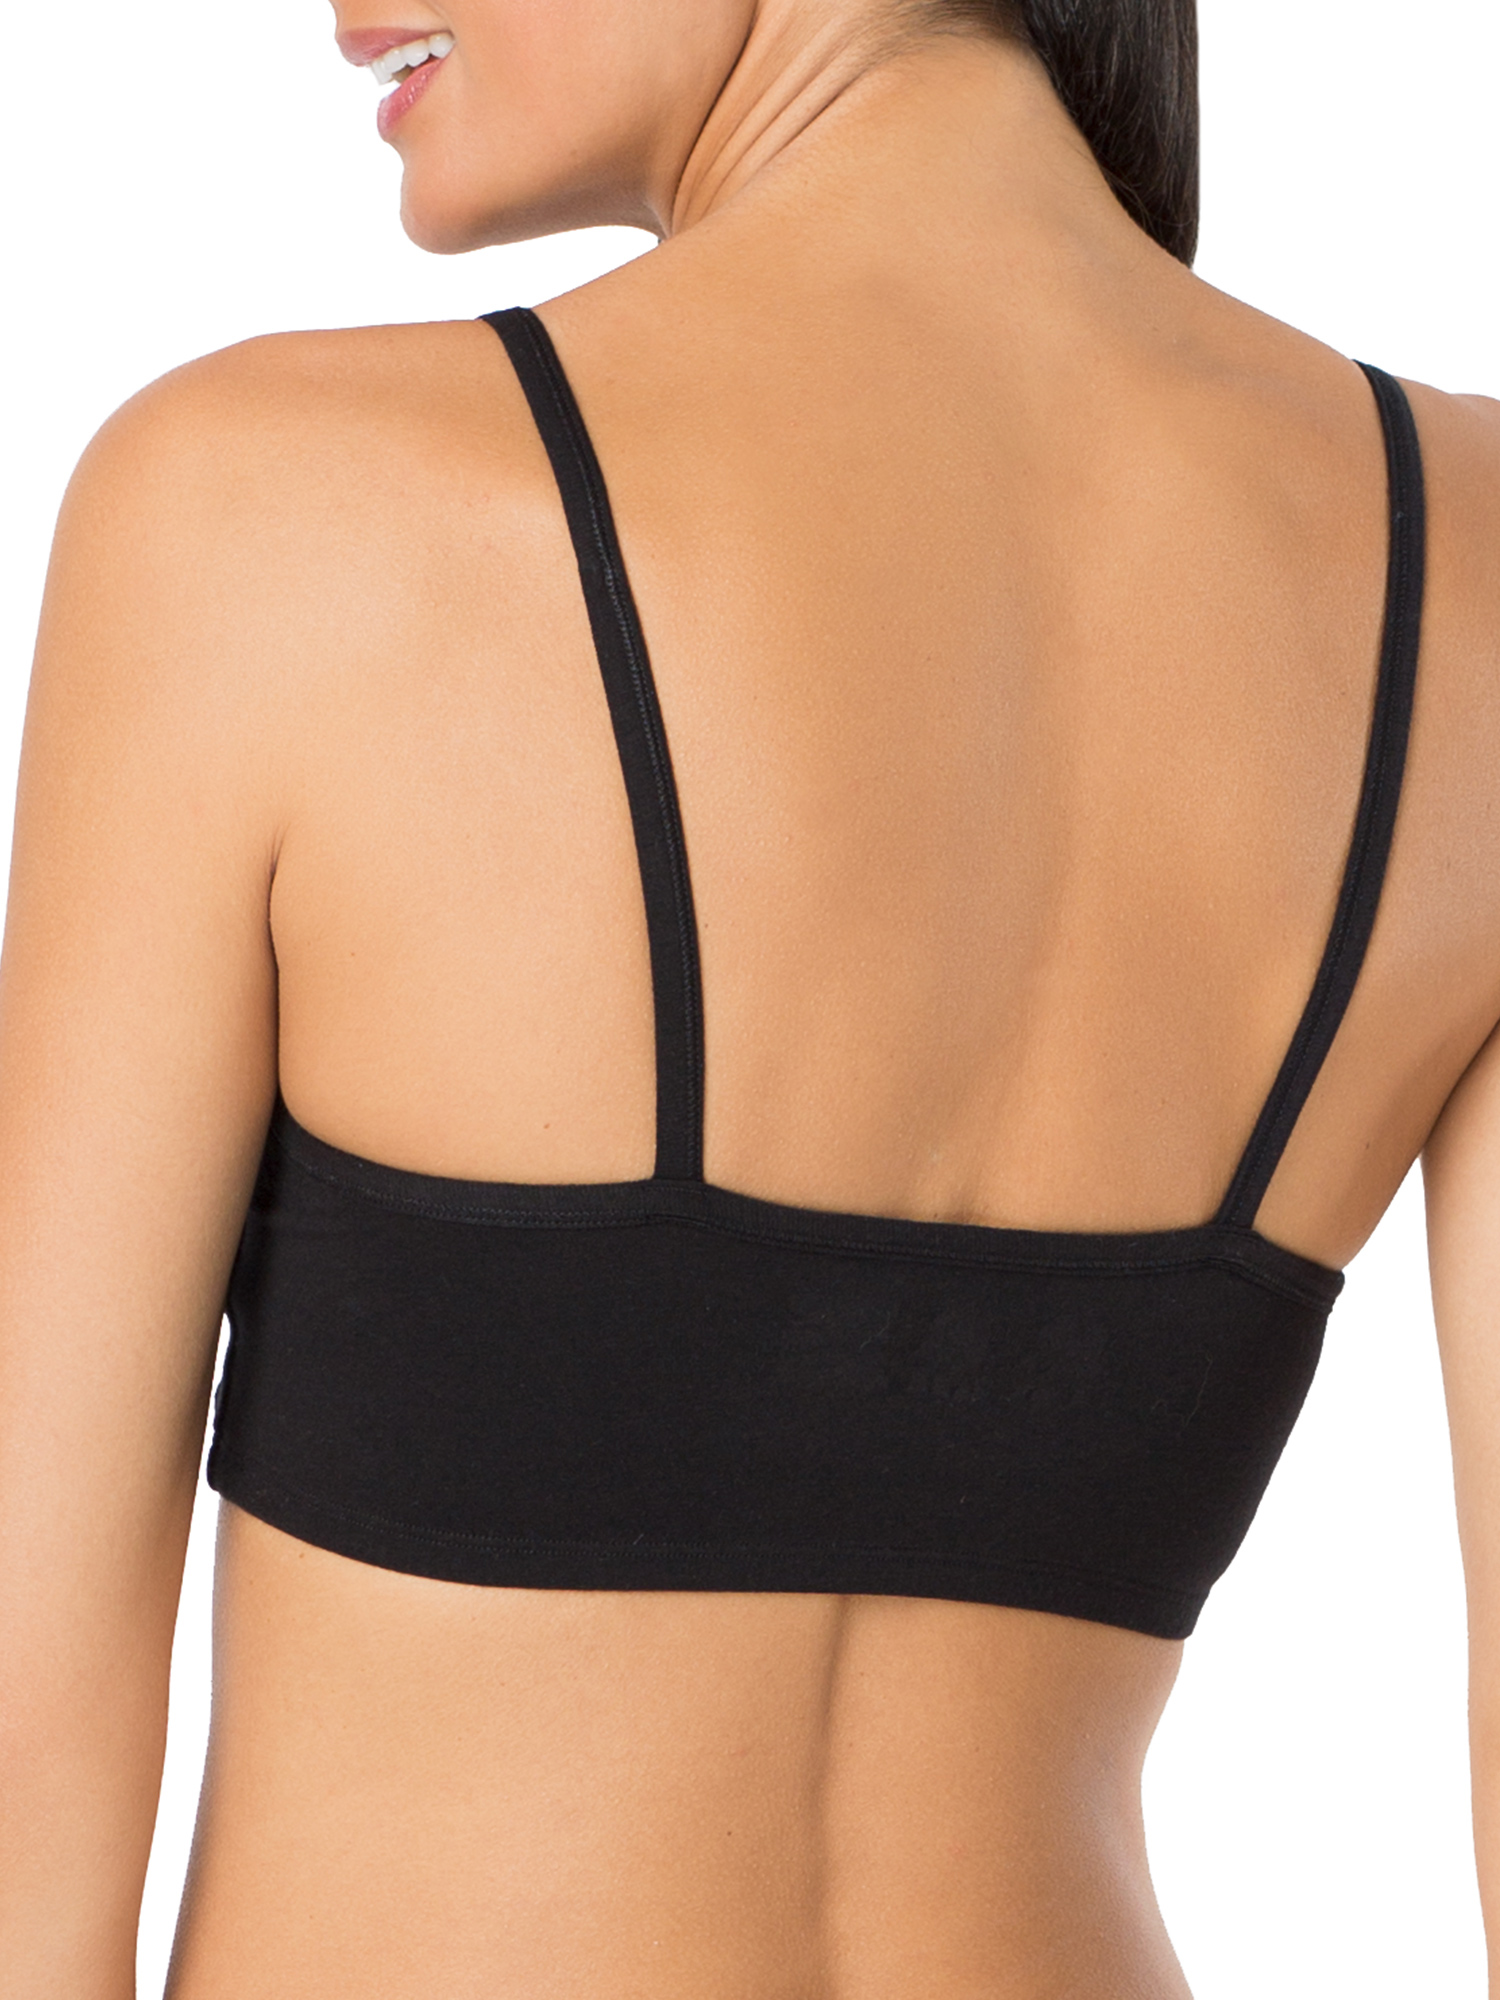 Fruit of the Loom Women's Spaghetti Strap Cotton Sports Bra, 3-Pack, Style-9036 - image 3 of 9